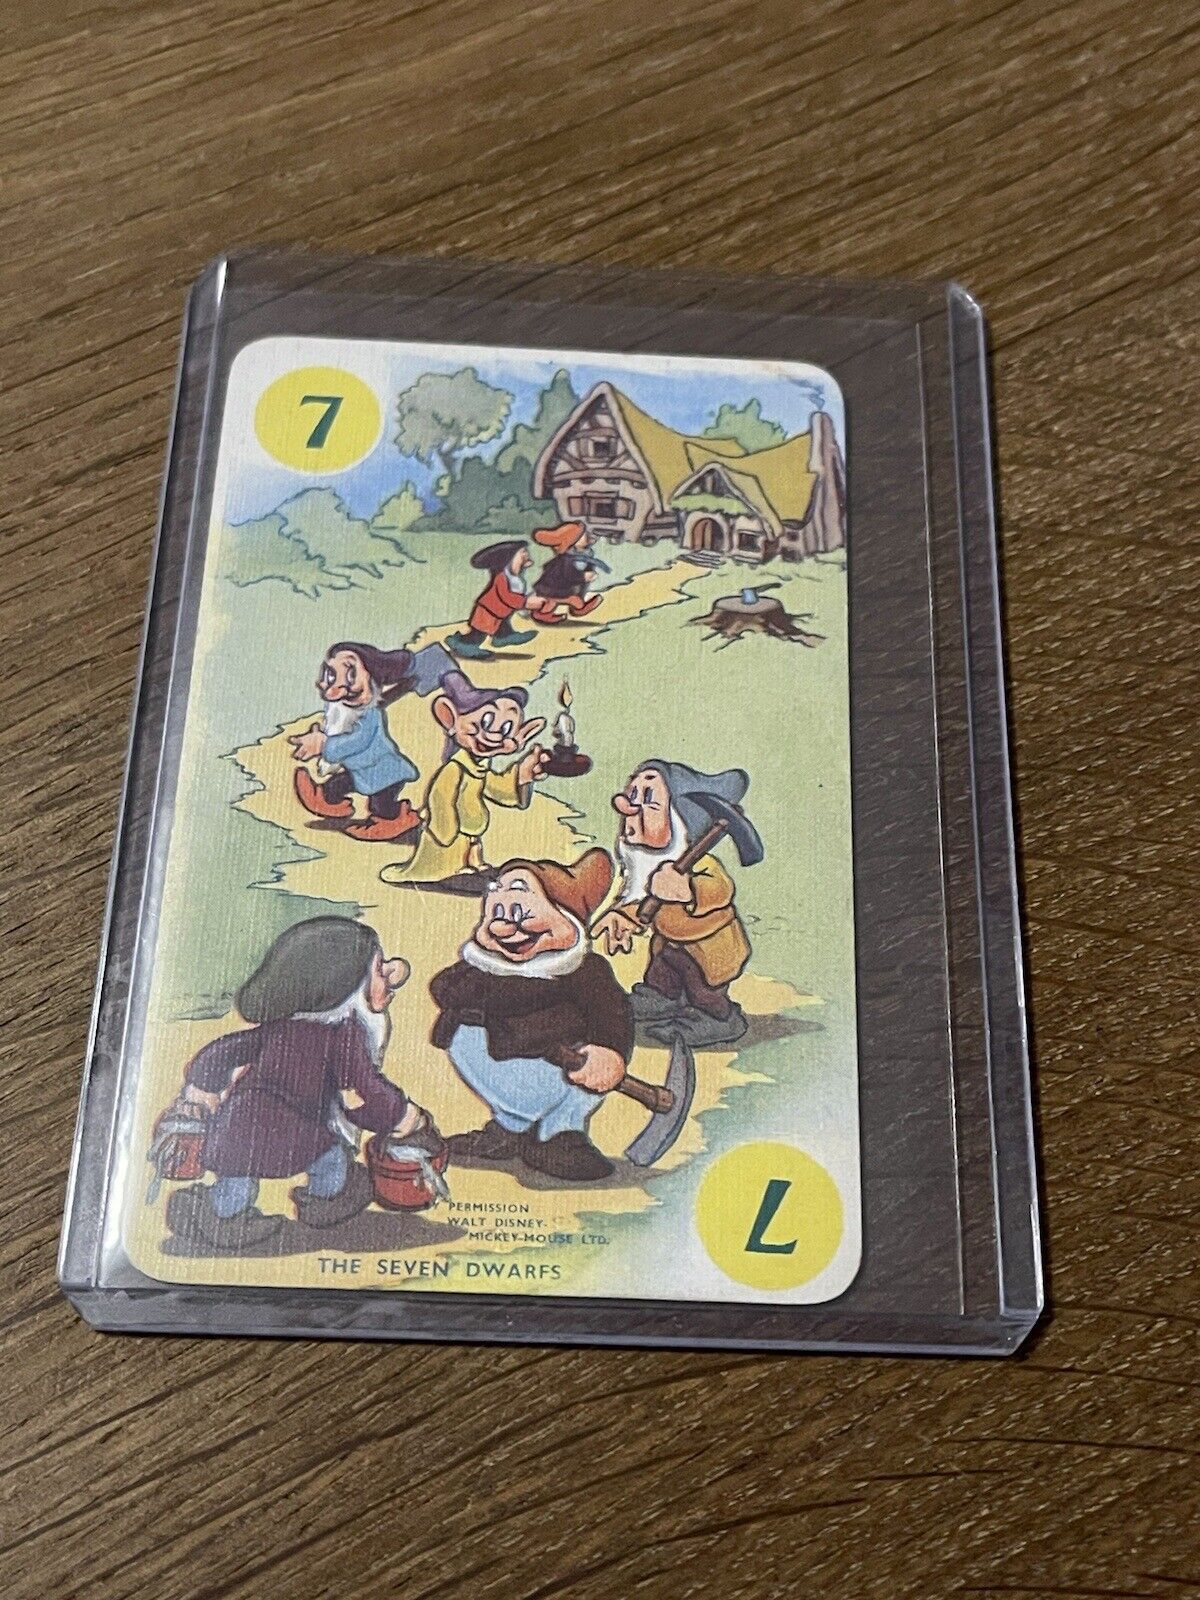 EXTREMELY RARE 1937 SNOW WHITE SEVEN DWARFS 1ST EDITION CARD GAME CASTELL PEPYS